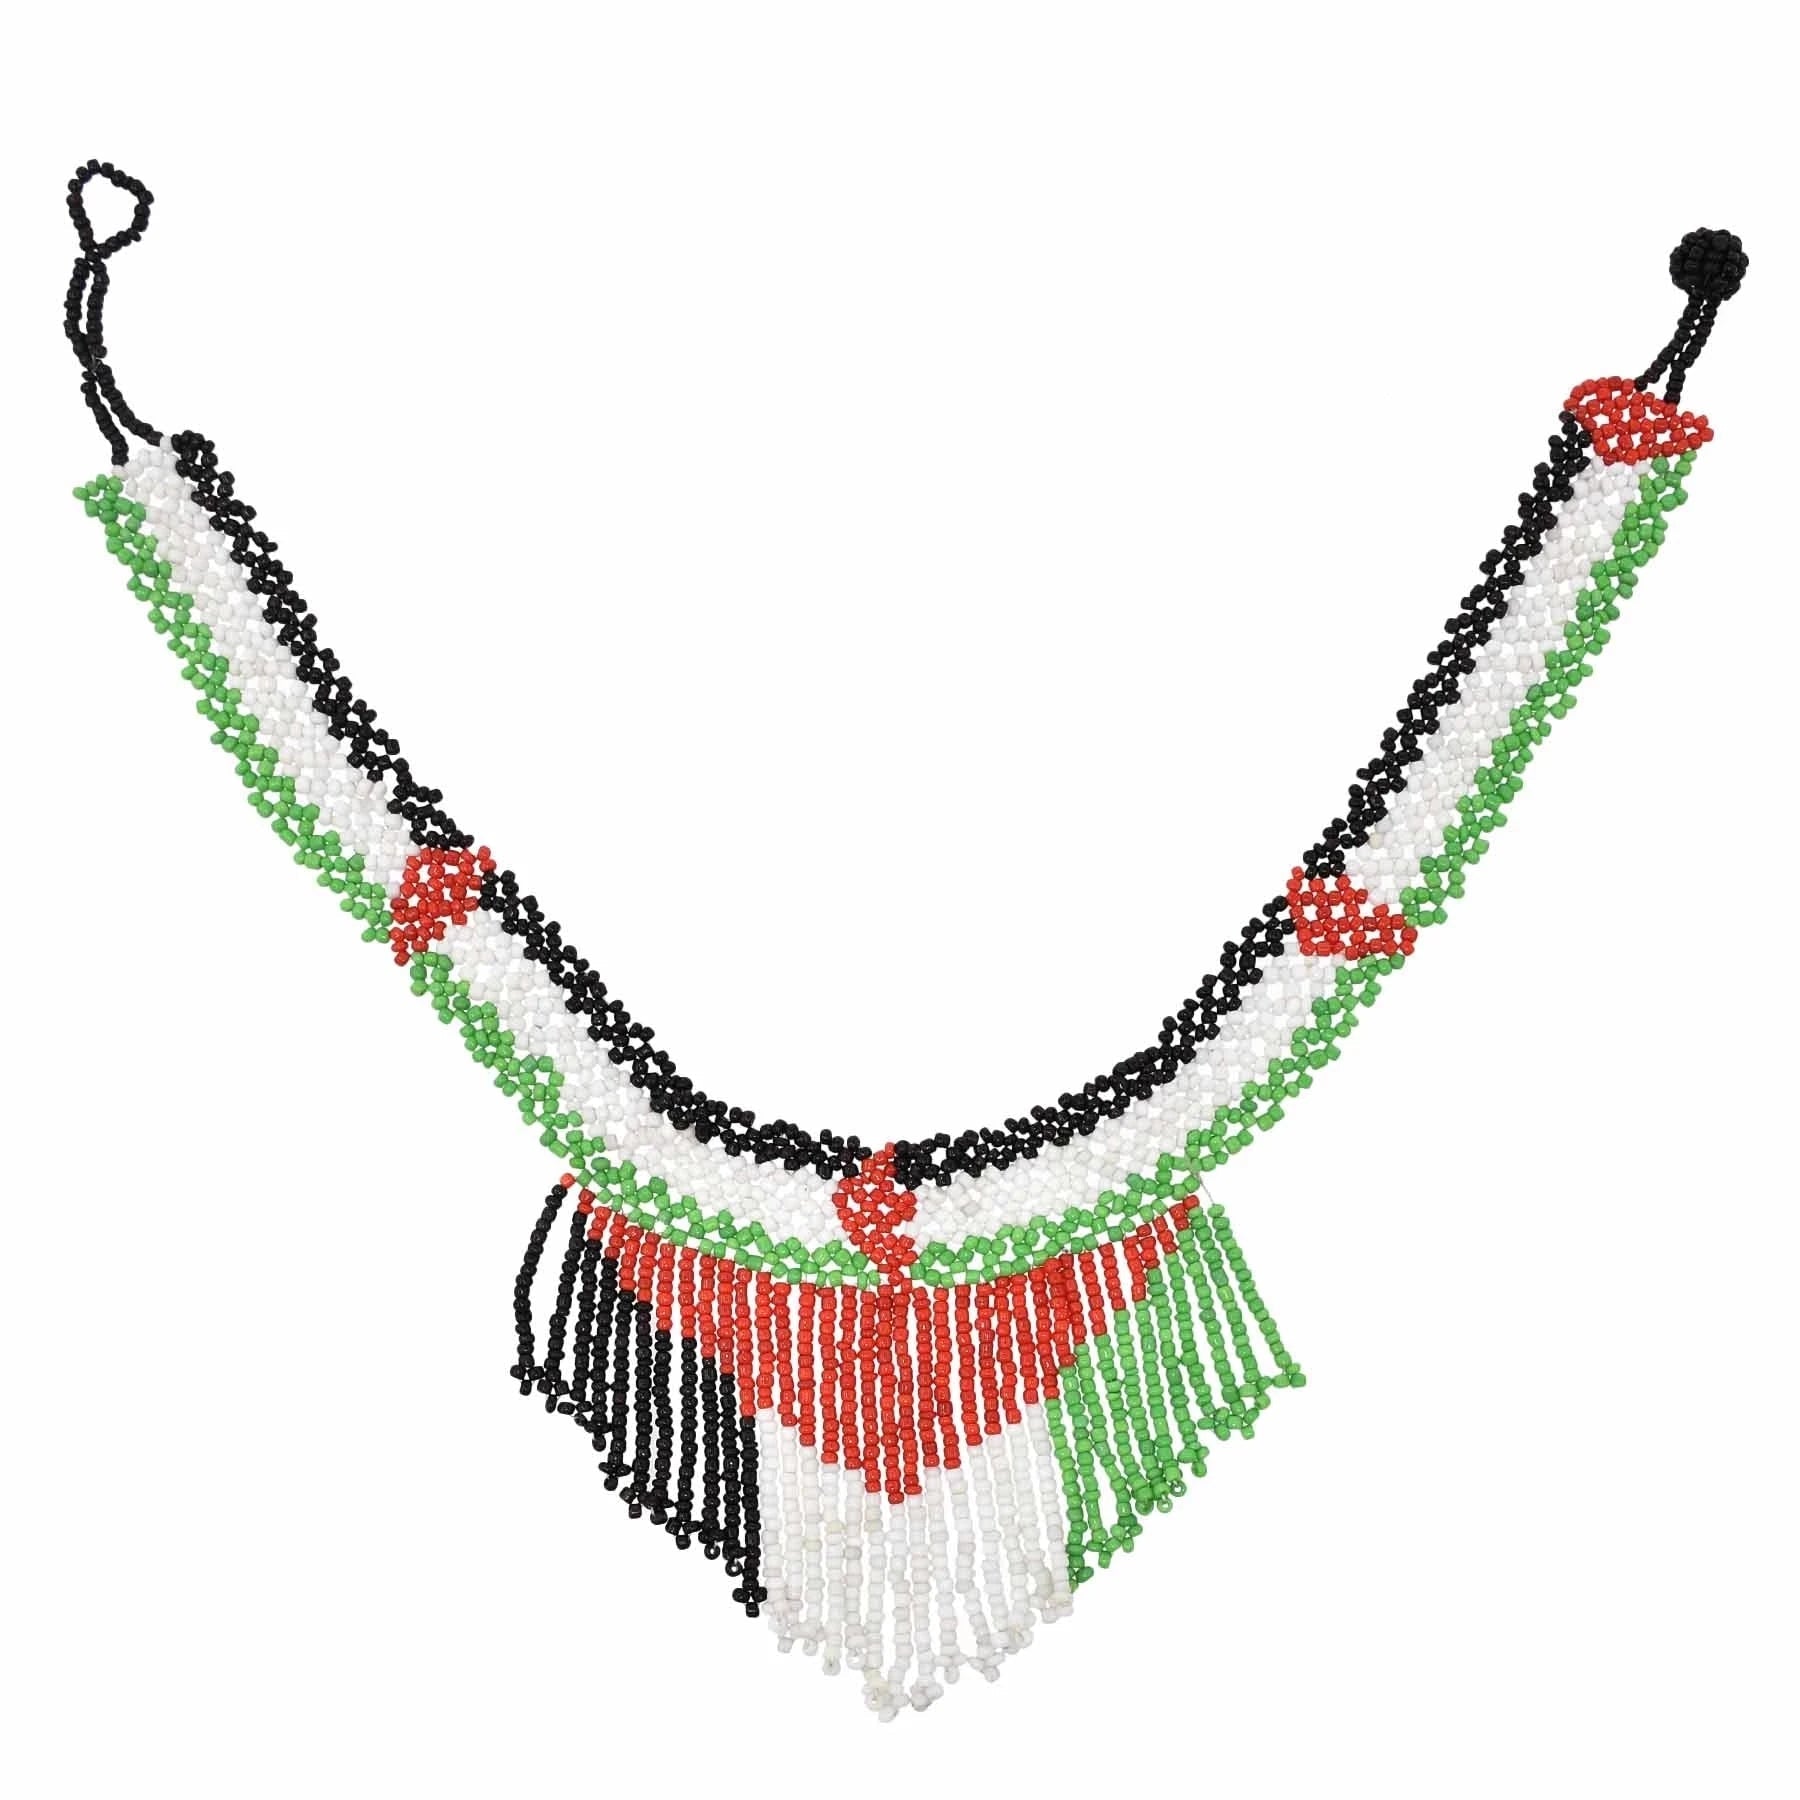 Bohemian Multicolored Beaded Choker: Vibrant Tribal Necklace for Women's Party Wear - Flexi Africa - www.flexiafrica.com